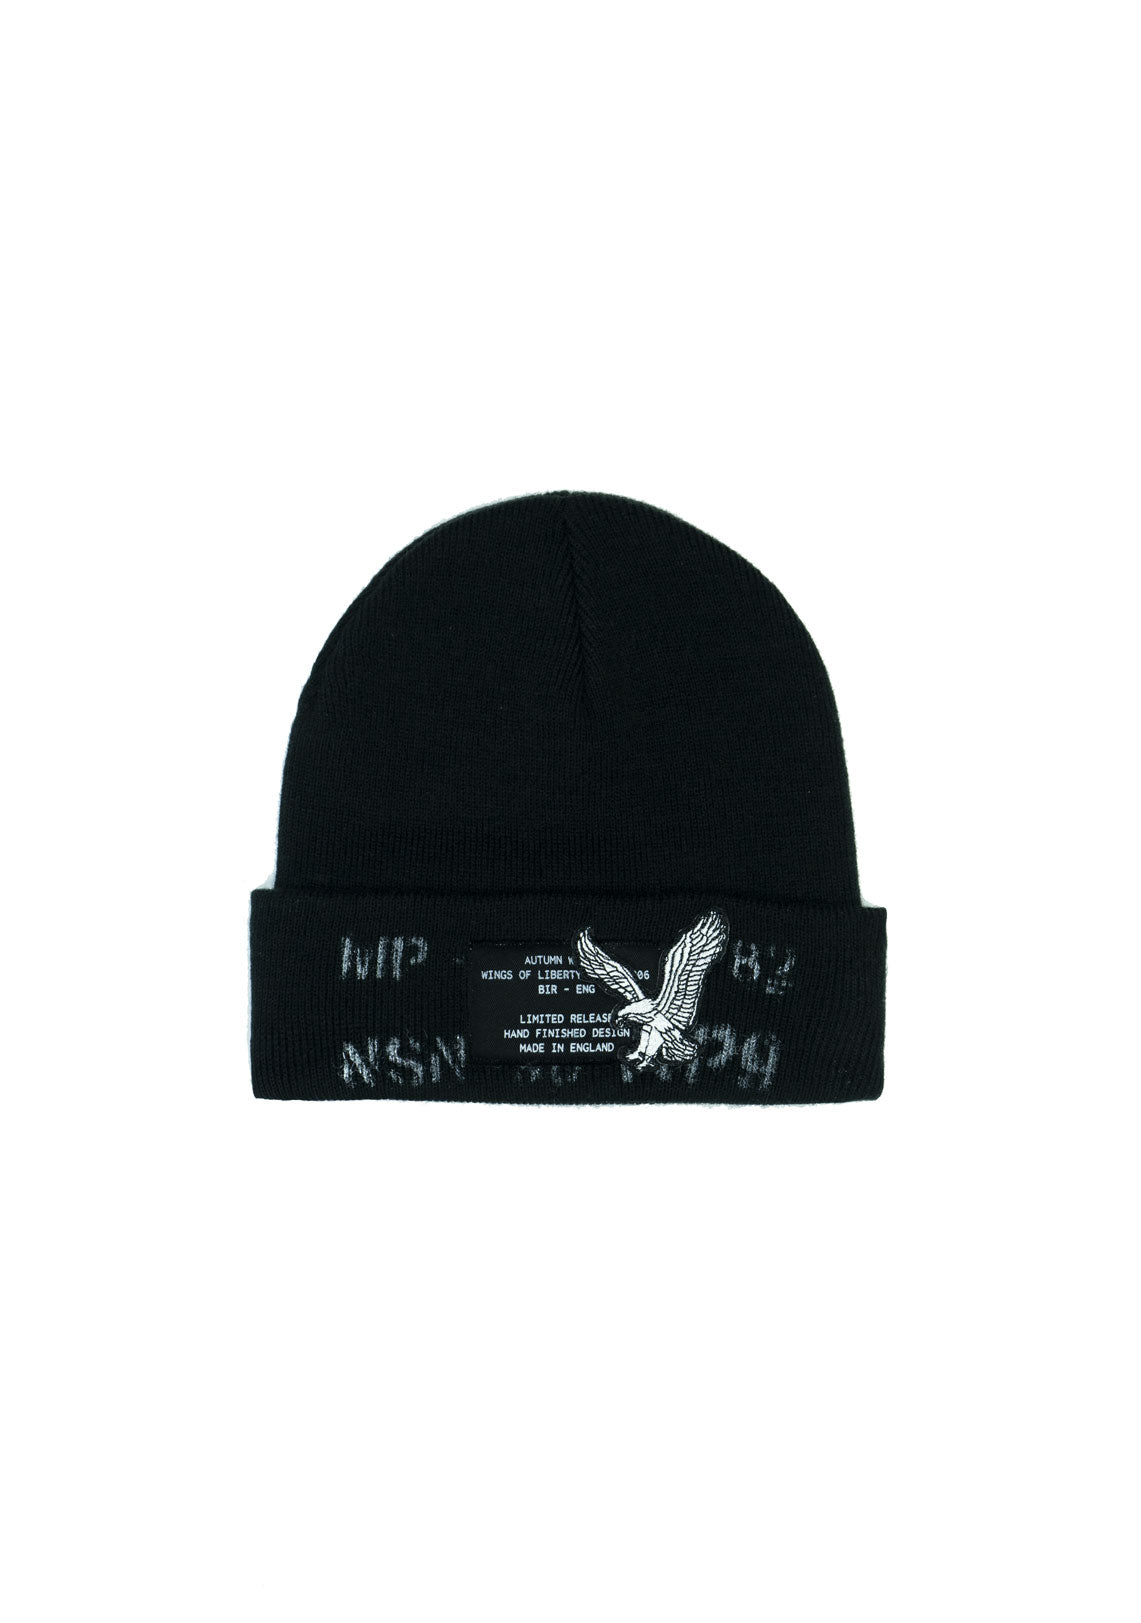 Deployment Beanie LTD - Wings Of Liberty Clothing